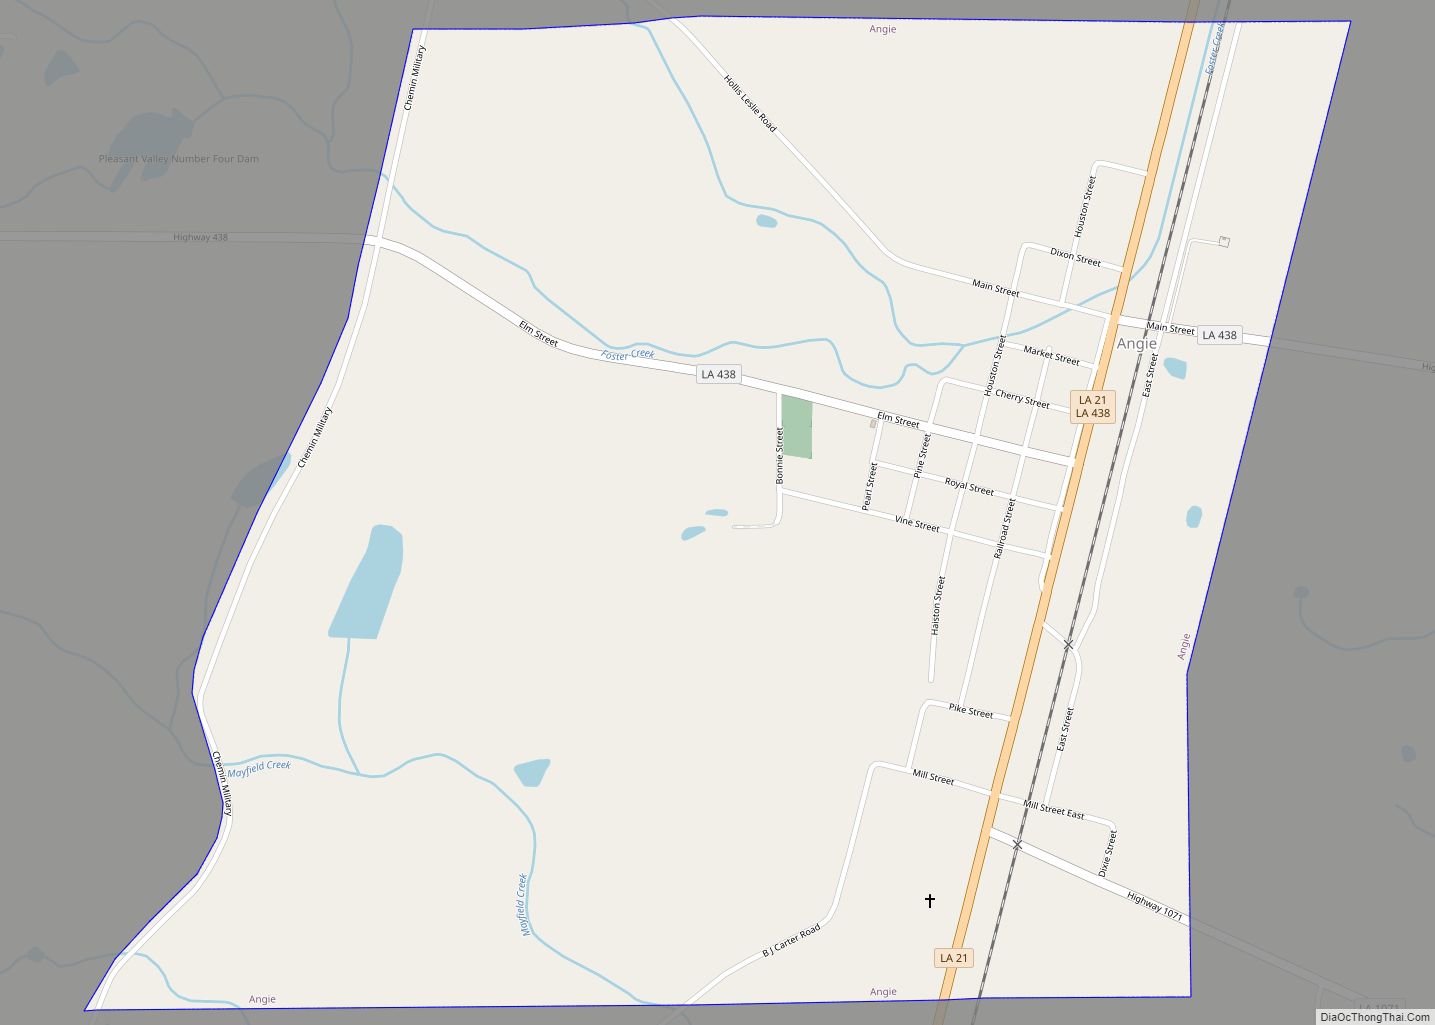 Map of Angie village